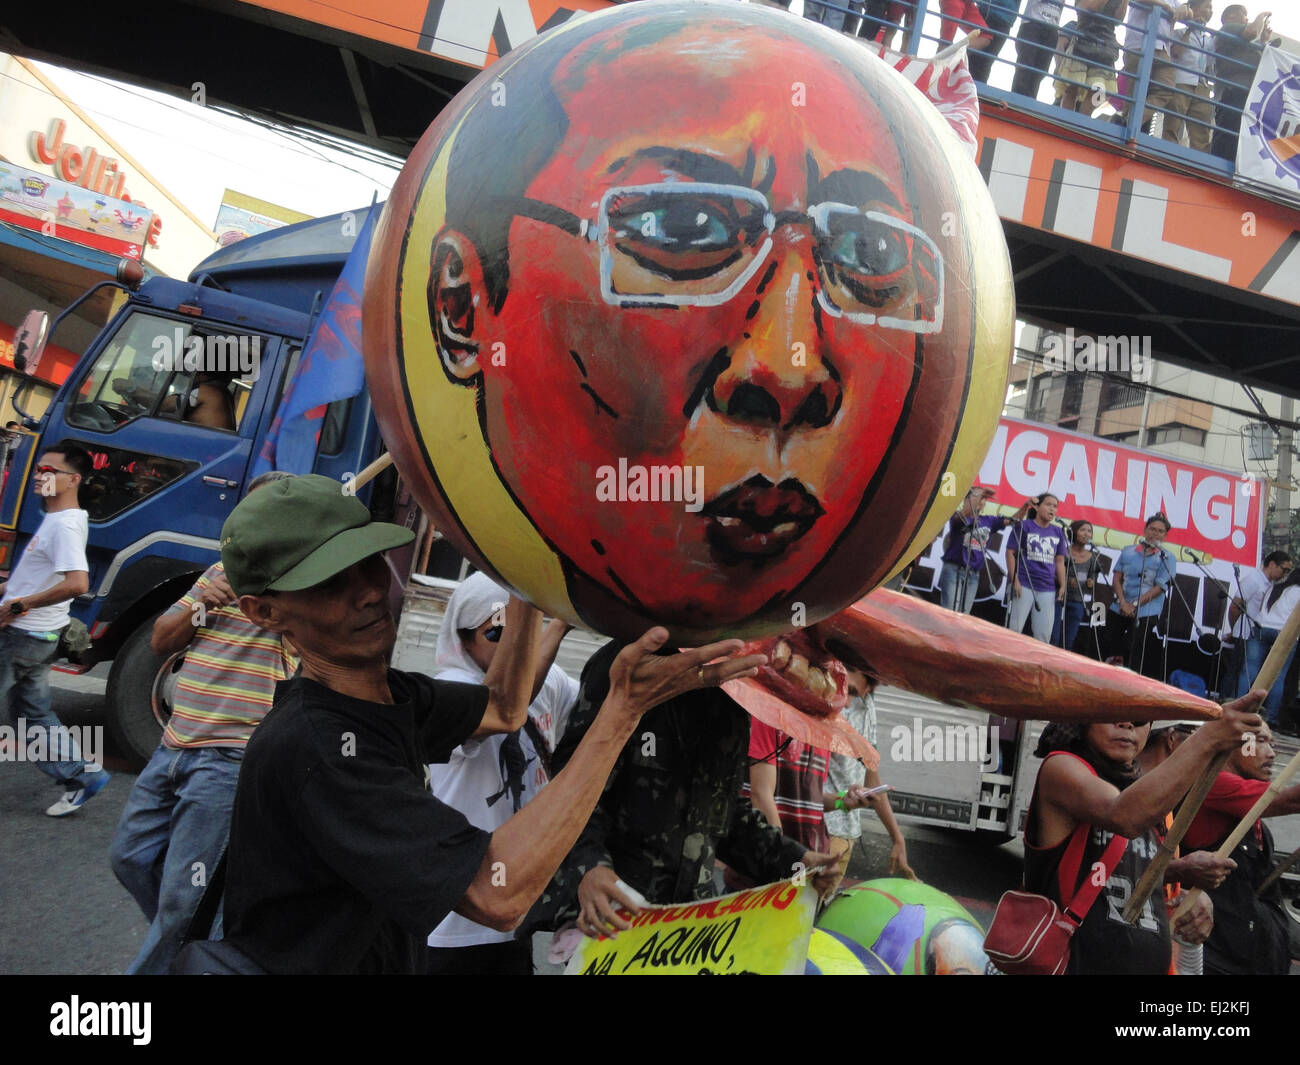 Manila, Philippines. 20th Mar, 2015. A Filipino activist hoists a ball up with the face of Philippine President Benigno Aquino III, during a rally at Mendiola. President Aquino is facing calls for his removal over the botched anti-terror operation last January 25 in Mamasapano, Maguindanao to hunt wanted Malaysian bombmaker Zulkifri bin Hir, alias Marwan, that resulted in the deaths of 44 police commandos. Credit:  Richard James Mendoza/Pacific Press/Alamy Live News Stock Photo